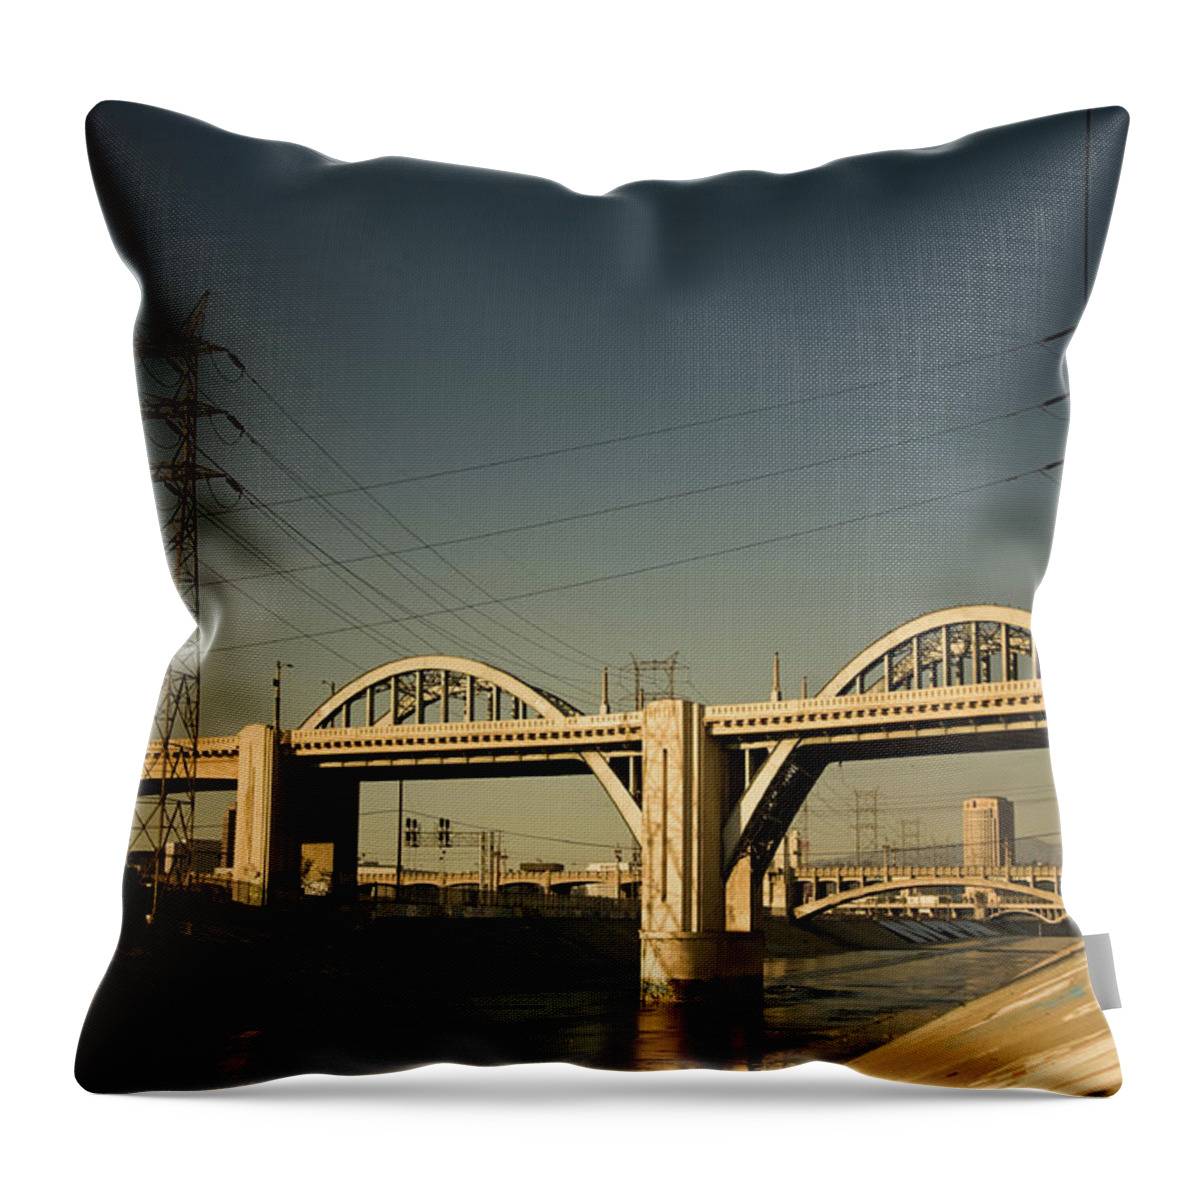 Los Angeles River Throw Pillow featuring the photograph Bridge In Downtown La by Halbergman